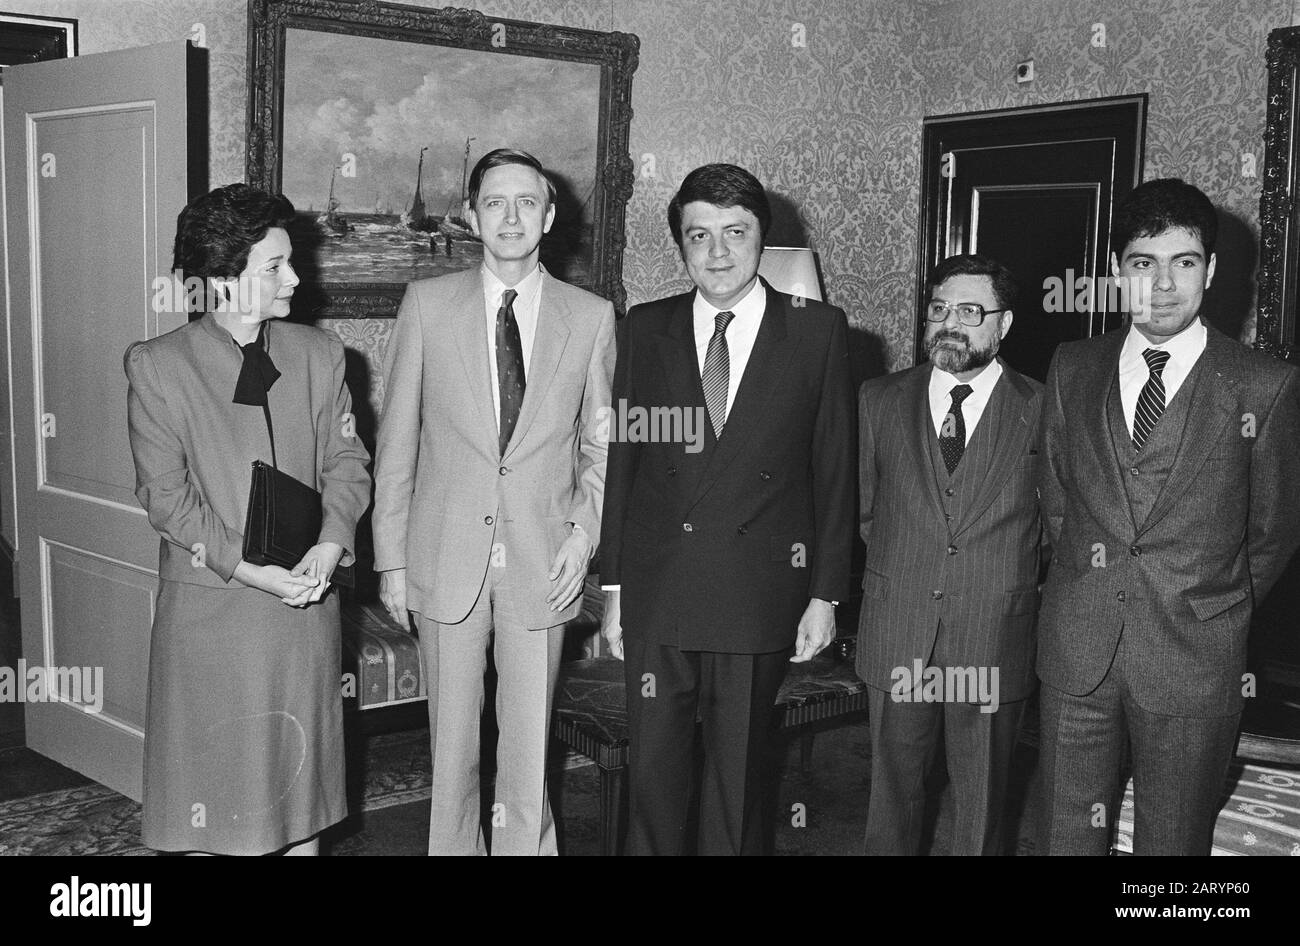 Chairman of the House Dolman (m) received today Nora Astorga (vice minister BuUZa Nicaraqua) (l) and Sergio Ramirez (member of the Nat. government Nicaraqua)/Date: May 3, 1982 Location: Nicaragua Keywords: politicians Stock Photo